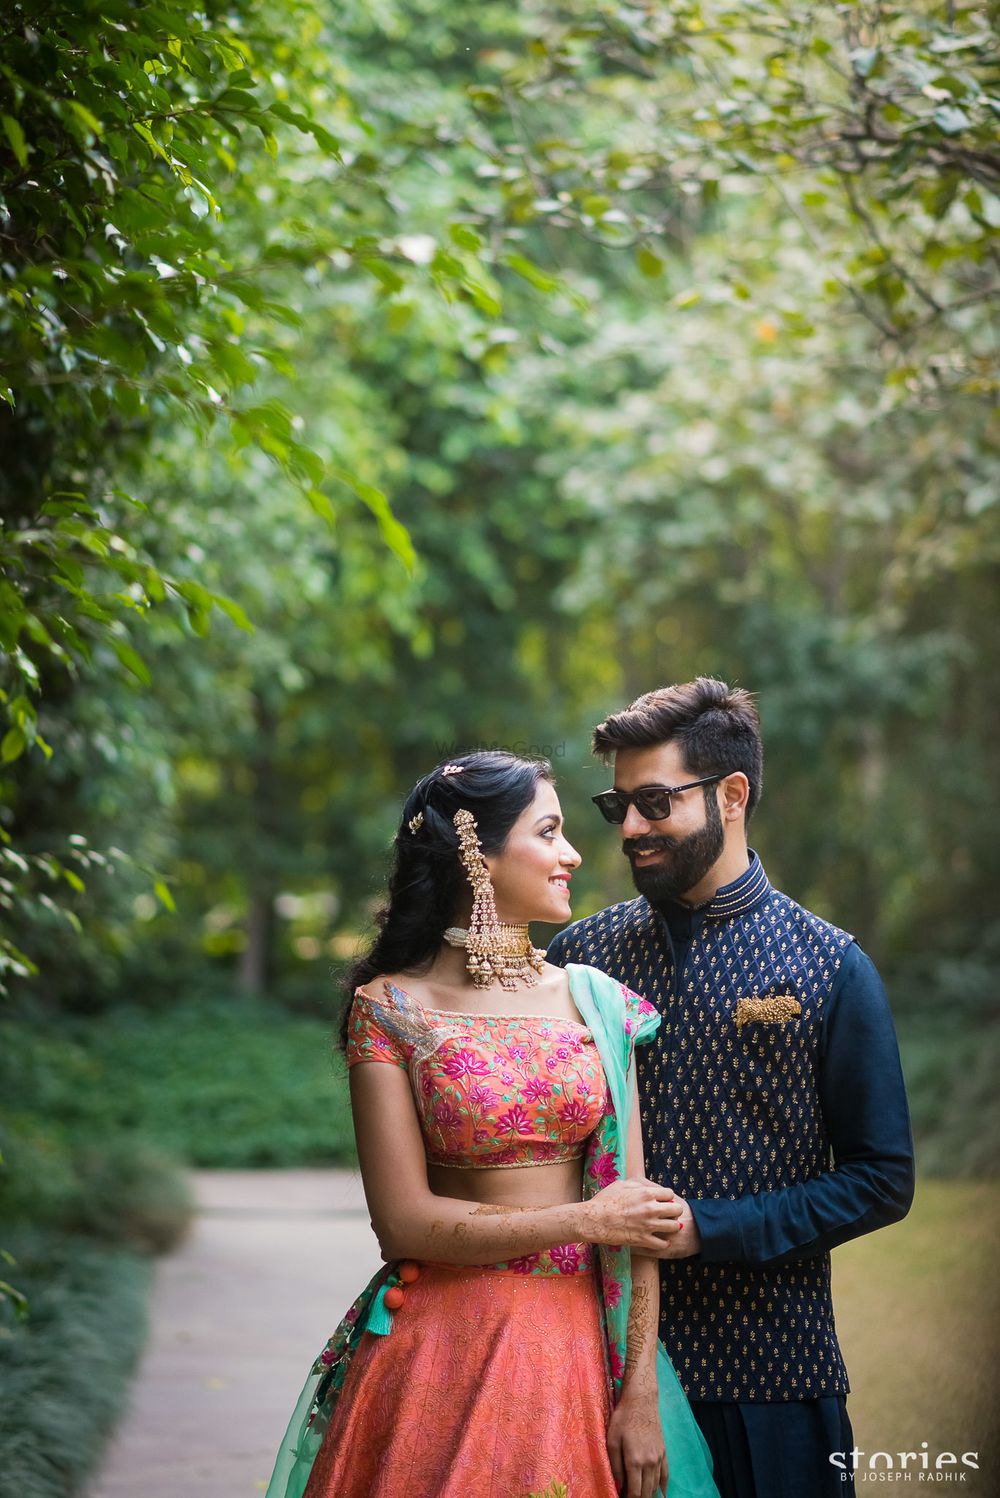 Photo of Mehendi bride and groom with contrasting outfits